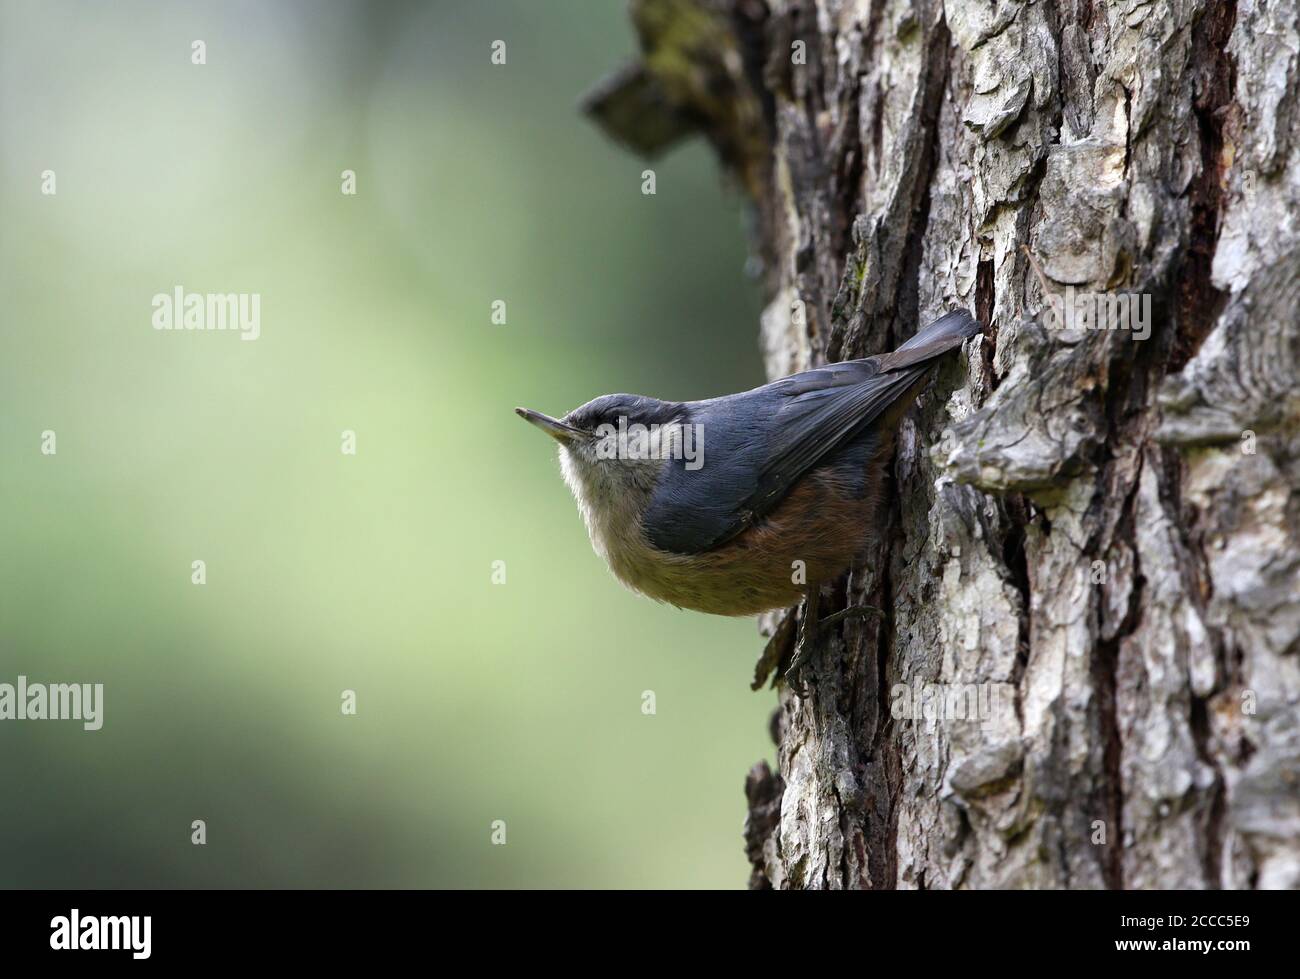 Female Kashmir Nuthatch (Sitta cashmirensis) in montane forest near Gulmarg, Kashmir province, India. Clinging to the bark of a tree. Stock Photo